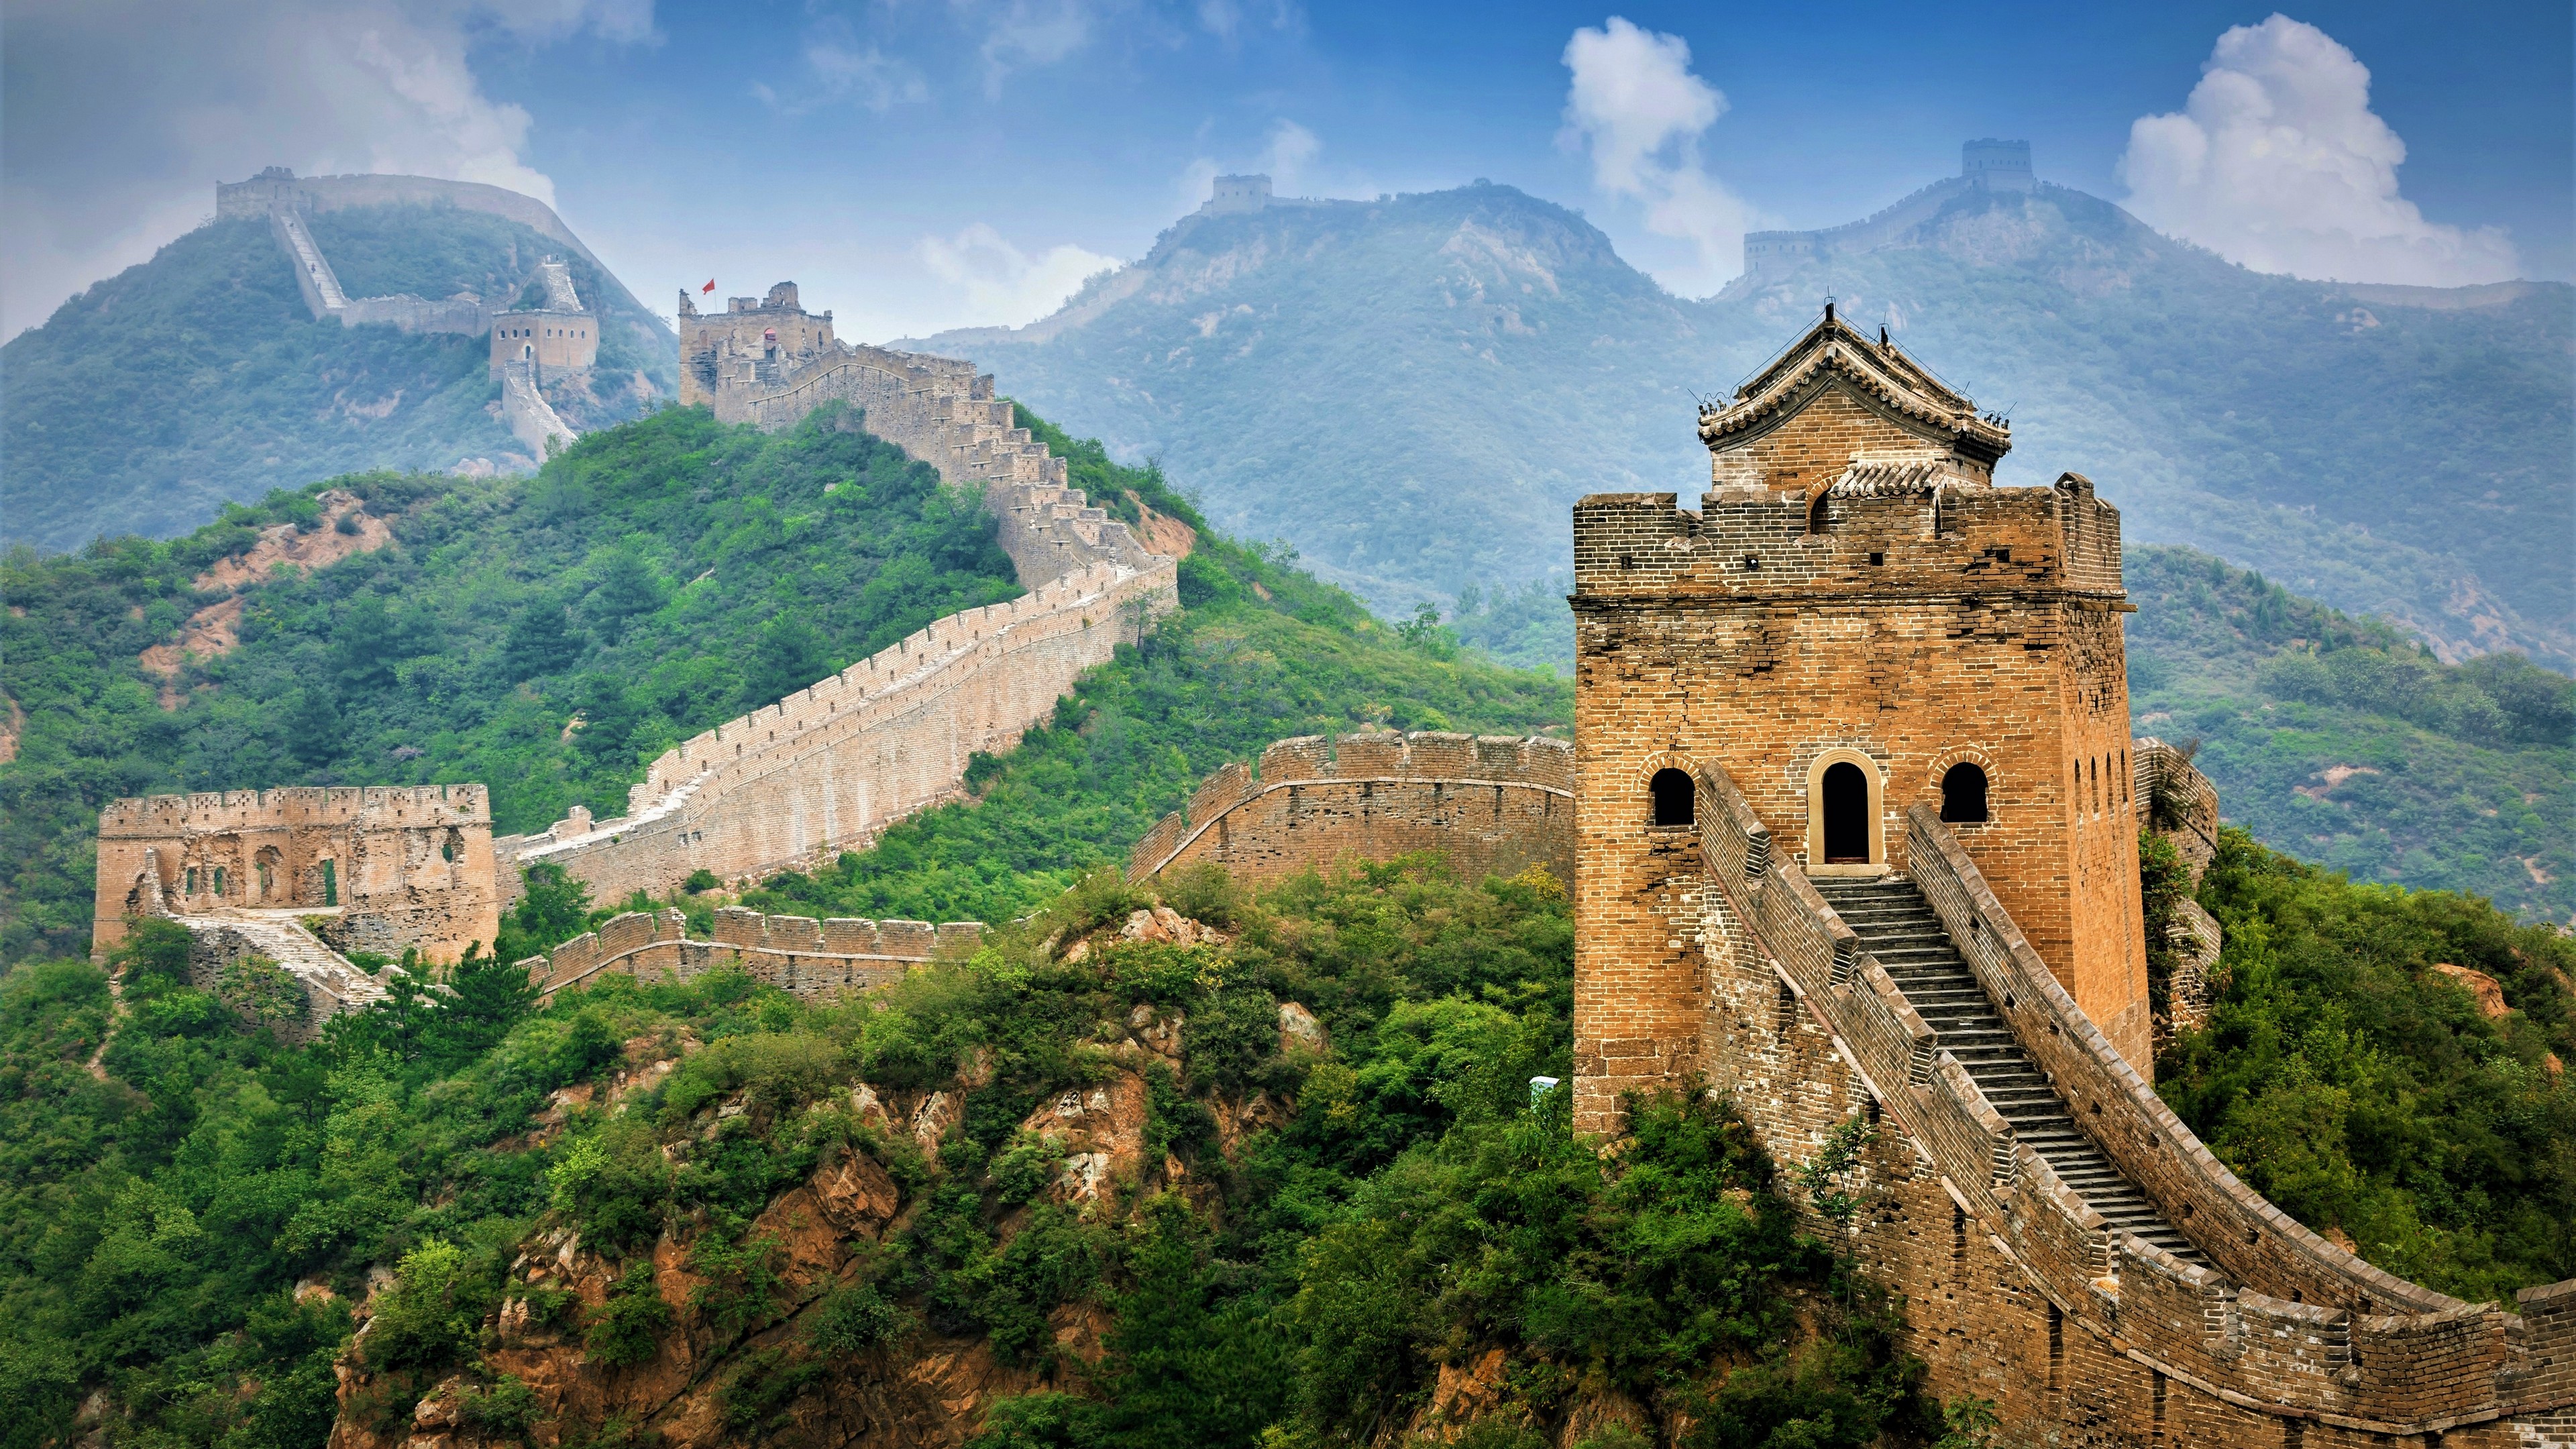 General 3840x2160 Great Wall of China wall China mountains history landscape sky Asia forest landmark